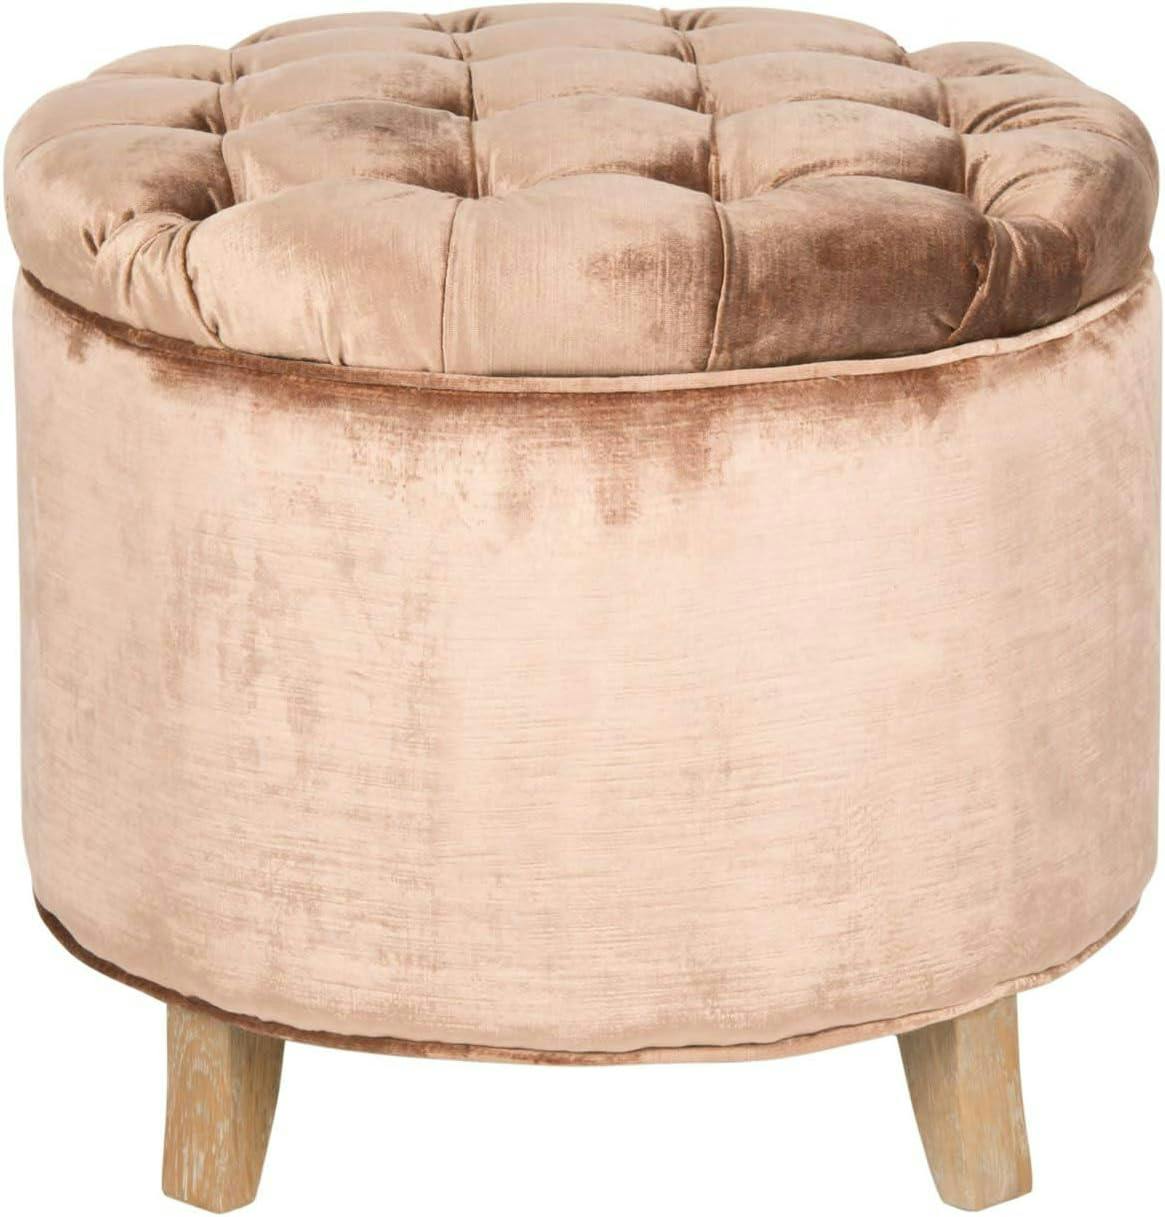 Transitional Pink Tufted Round Storage Ottoman with Oak Legs